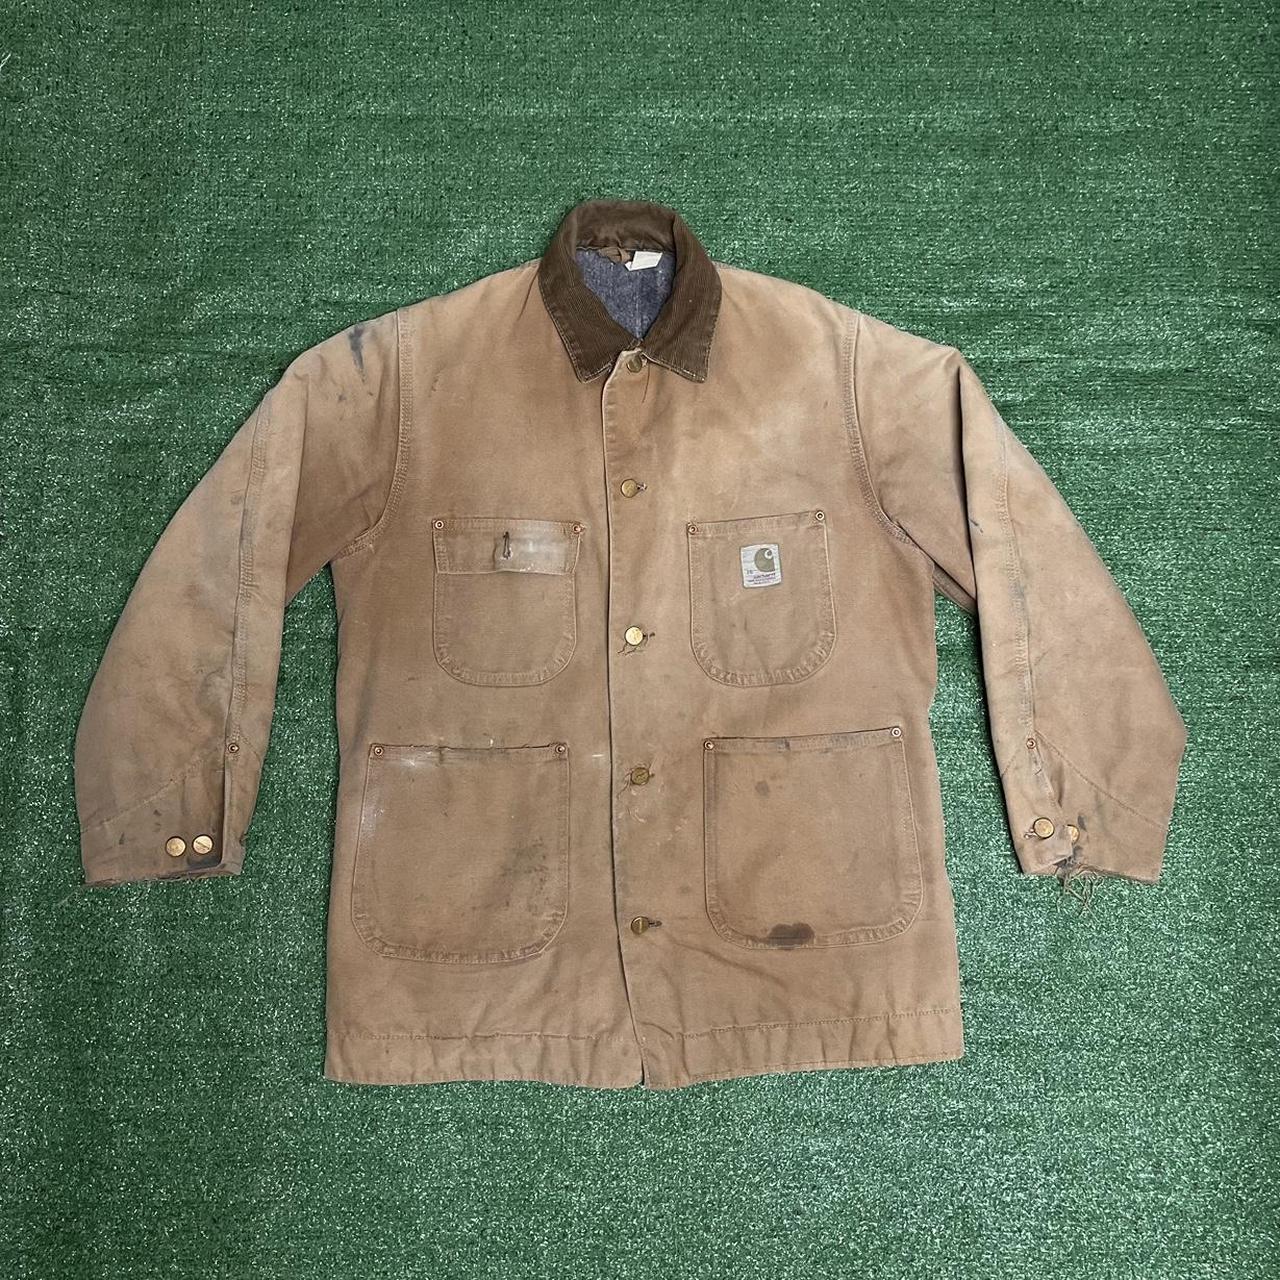 Vintage paper tag Carhartt chore jacket with cozy... - Depop